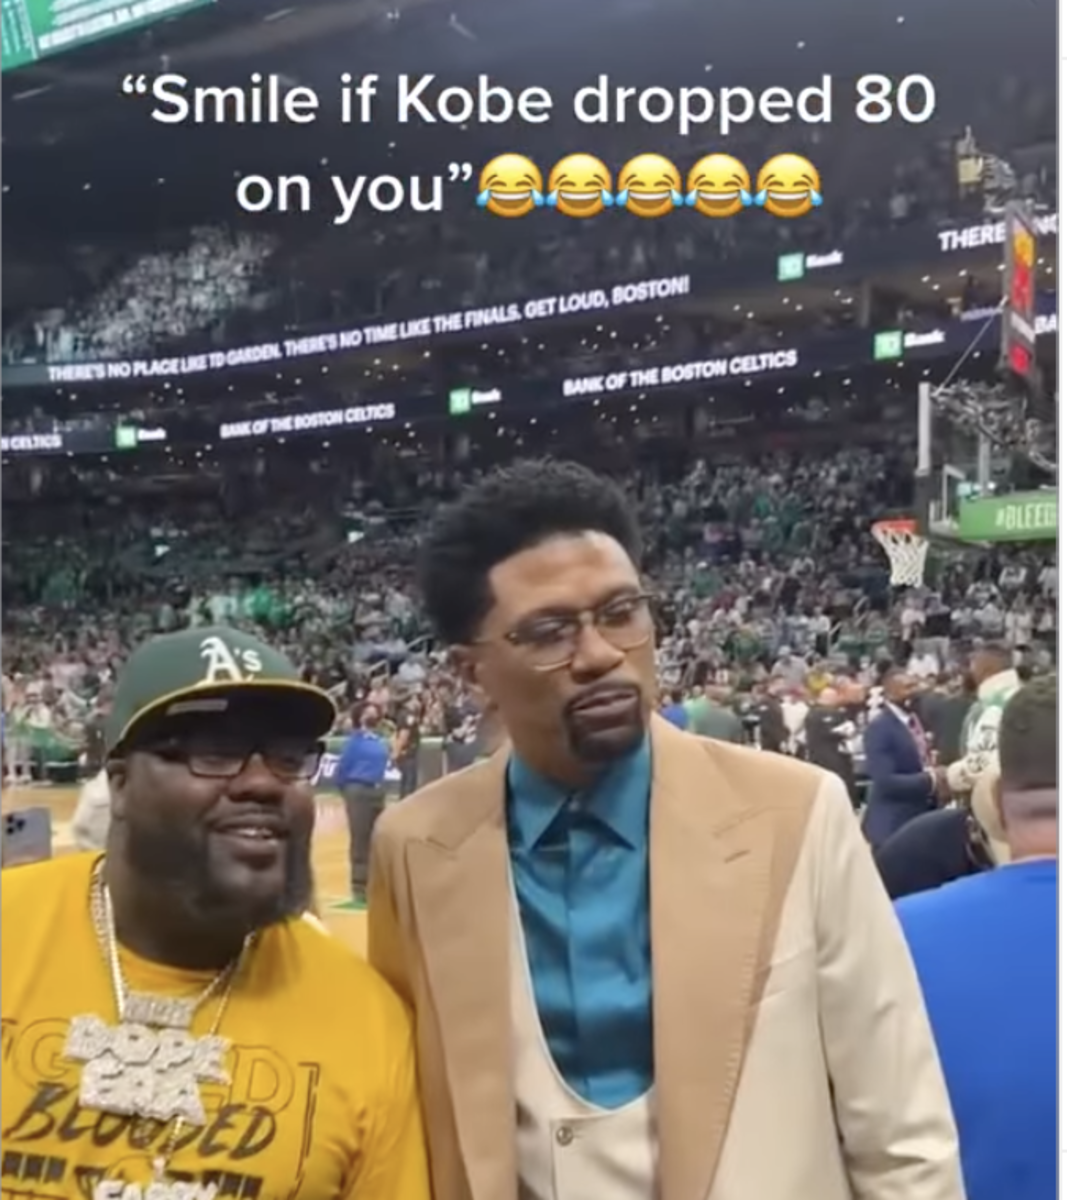 Celtics Fan Hilariously Roasts Jalen Rose As He Poses For A Picture In TD Garden: "Smile If Kobe Bryant Dropped 80 On You!"